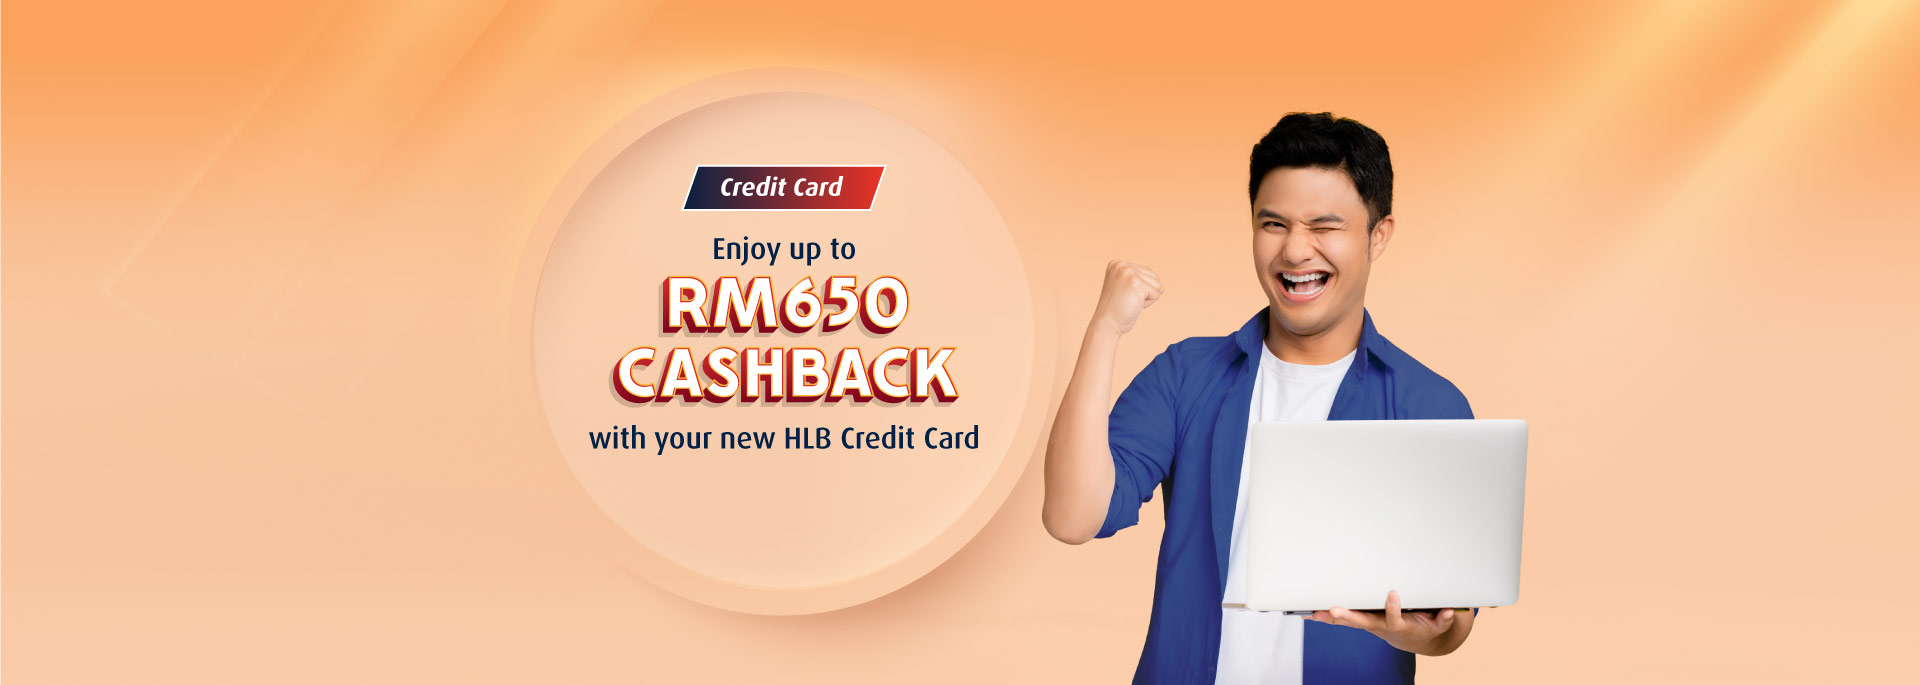 Shop to your heart’s content with awesome cashback!